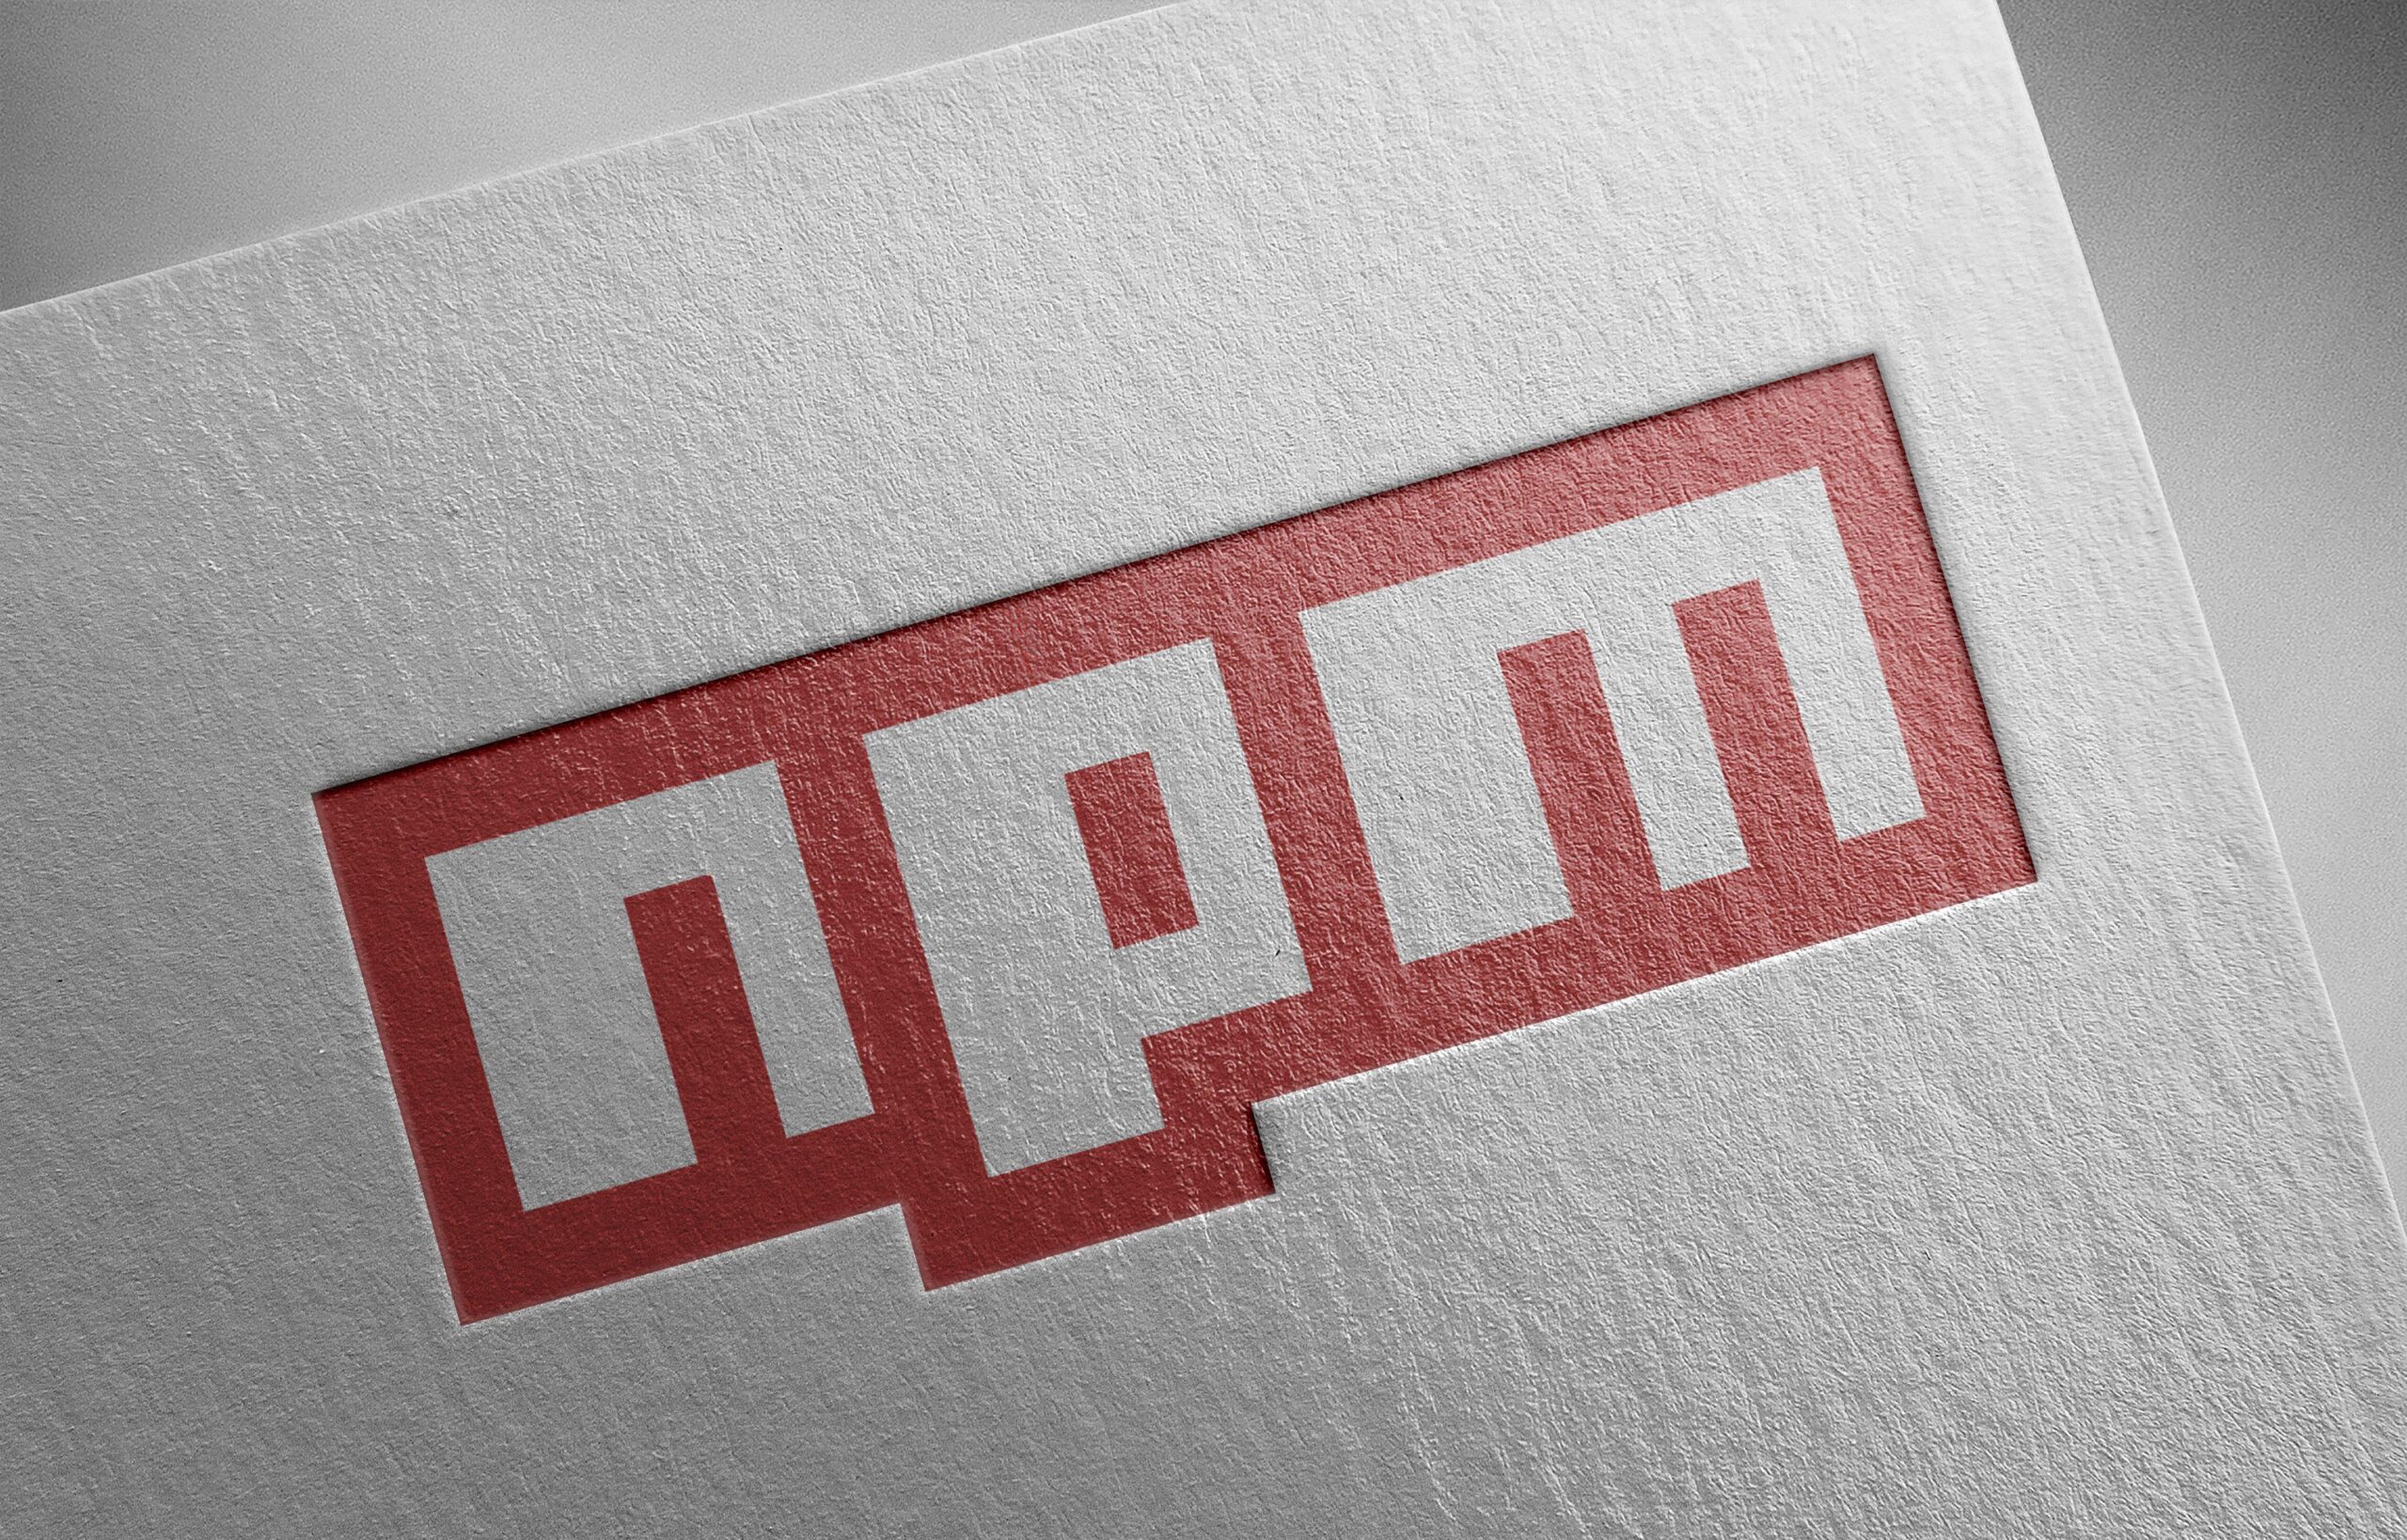 NPM Plagued With ‘Manifest Confusion’ Malware-Hiding Weakness – Source: www.darkreading.com